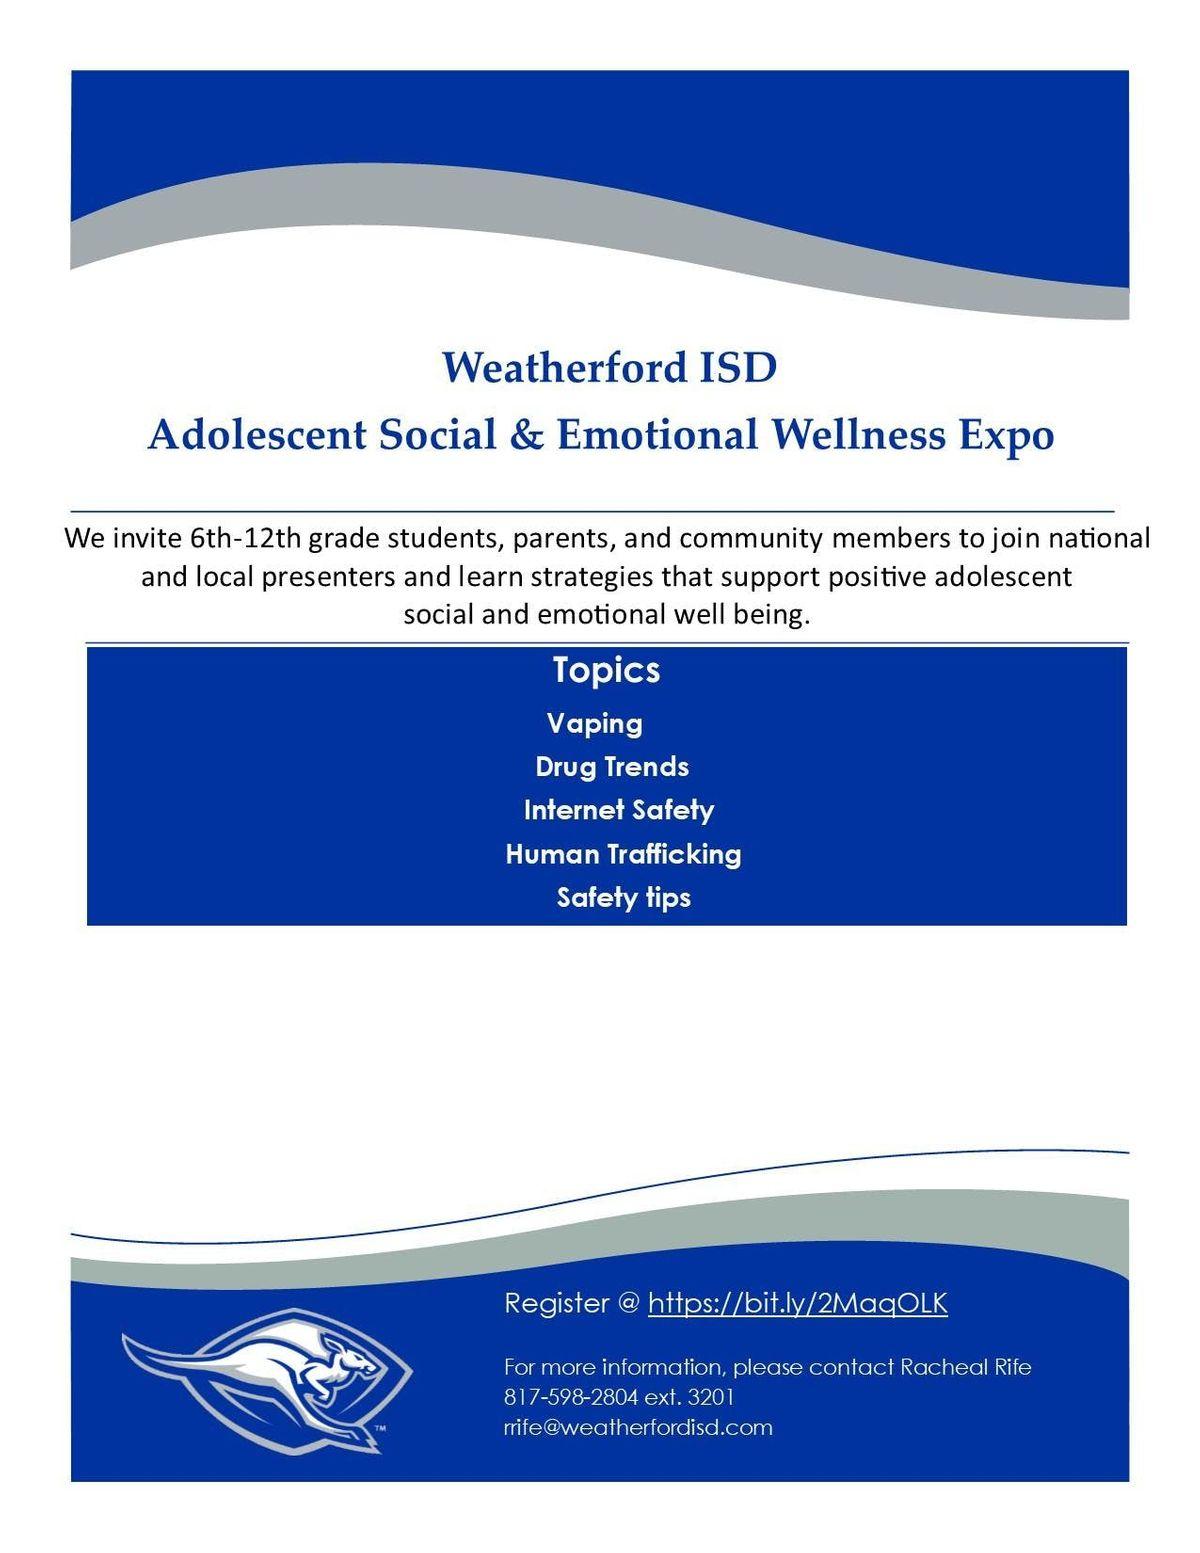 Weatherford ISD Logo - Weatherford ISD Adolescent Social & Emotional Wellness Expo at WHS